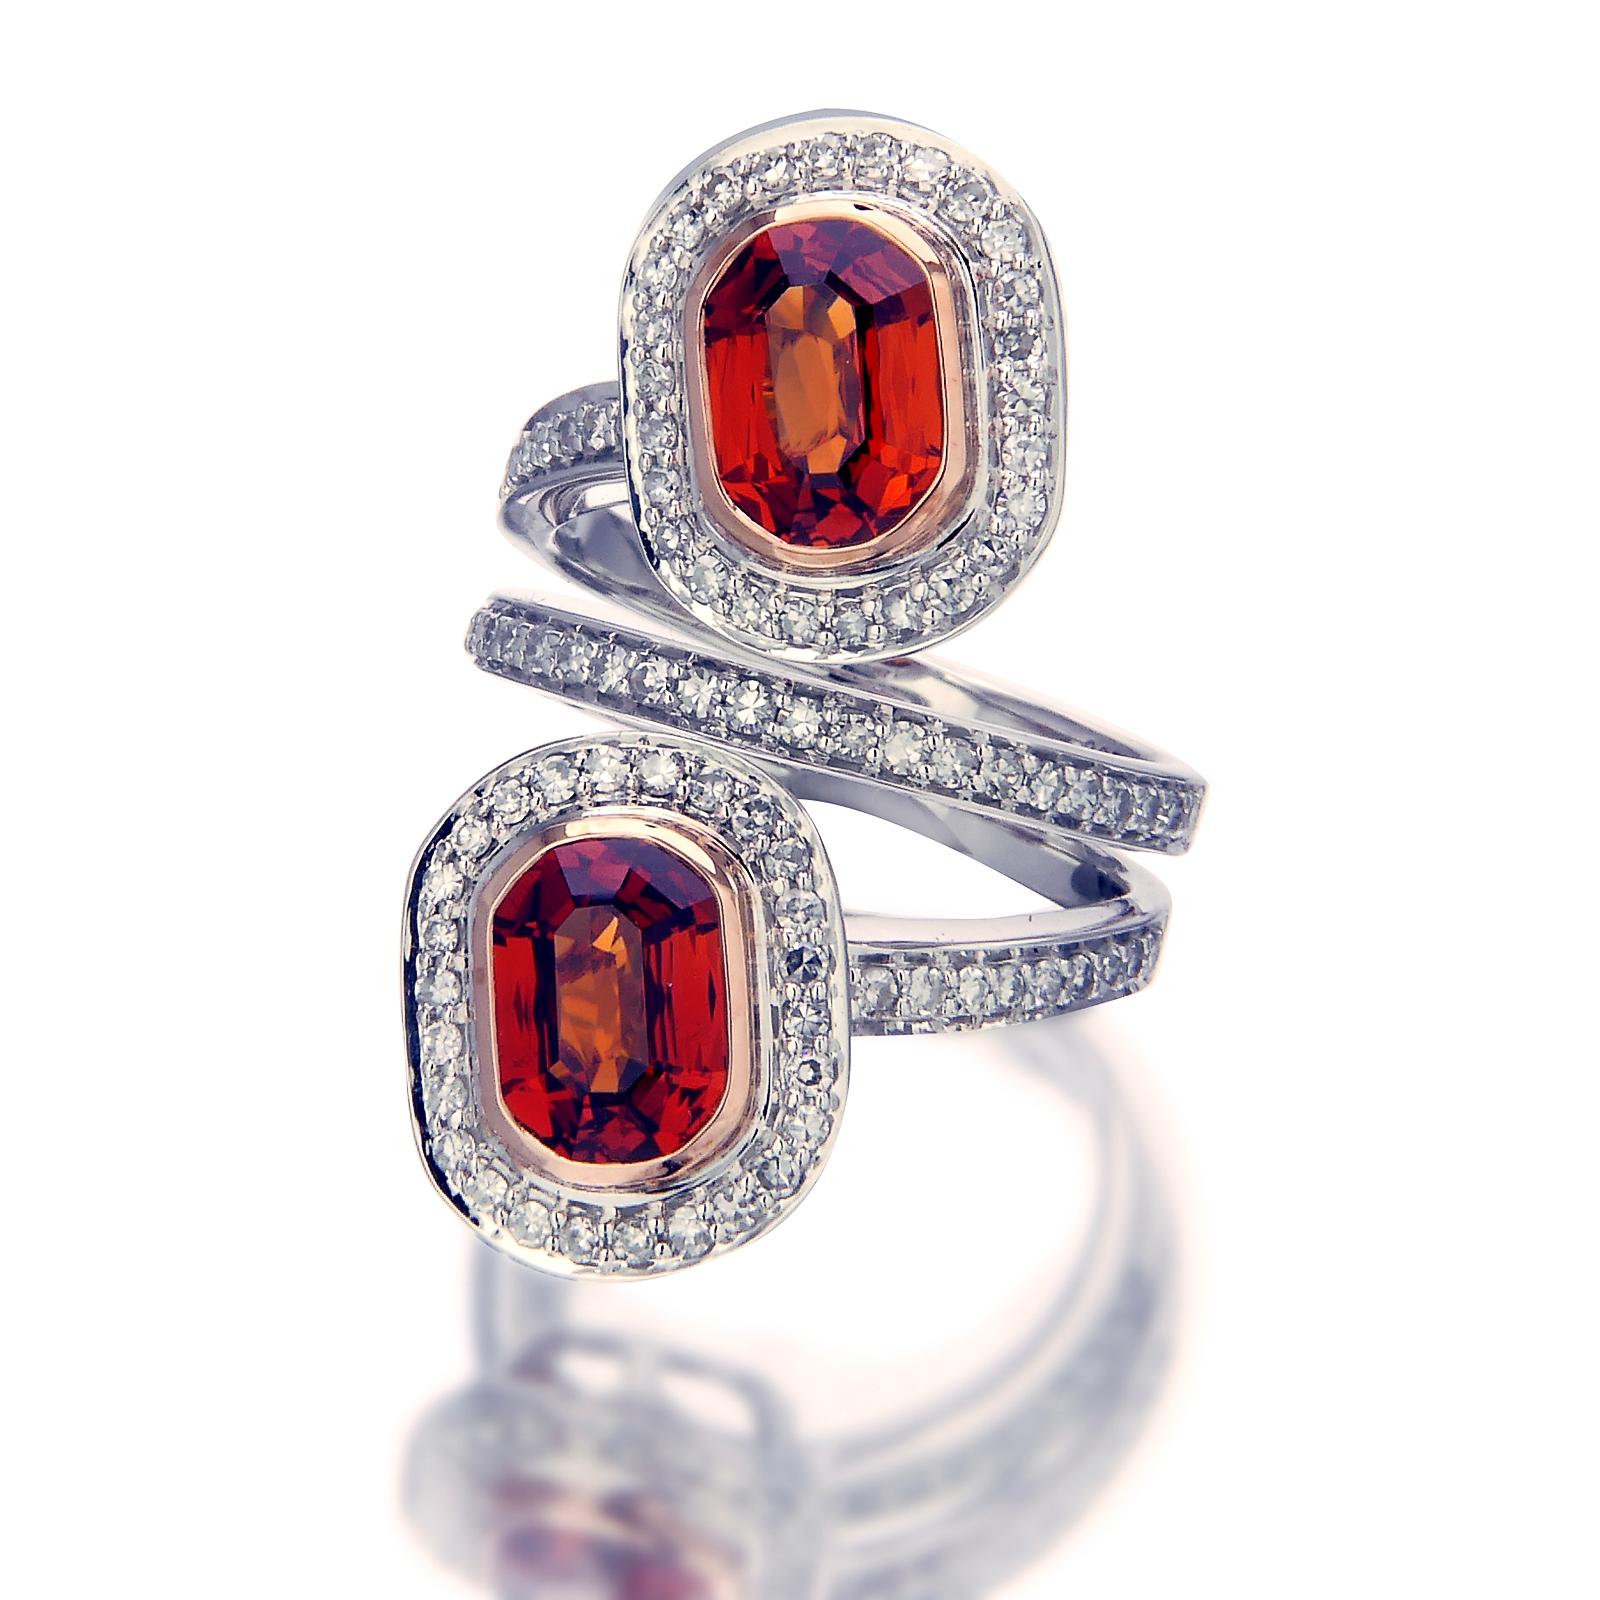 Two reddish-orange spessartite garnets totaling 4.57 carats fixed on pedestals gives this ring a fiery glow. The gems are framed with a row of 0.81-carat diamond pavé that continue down through the circular base of the 18k white gold and palladium